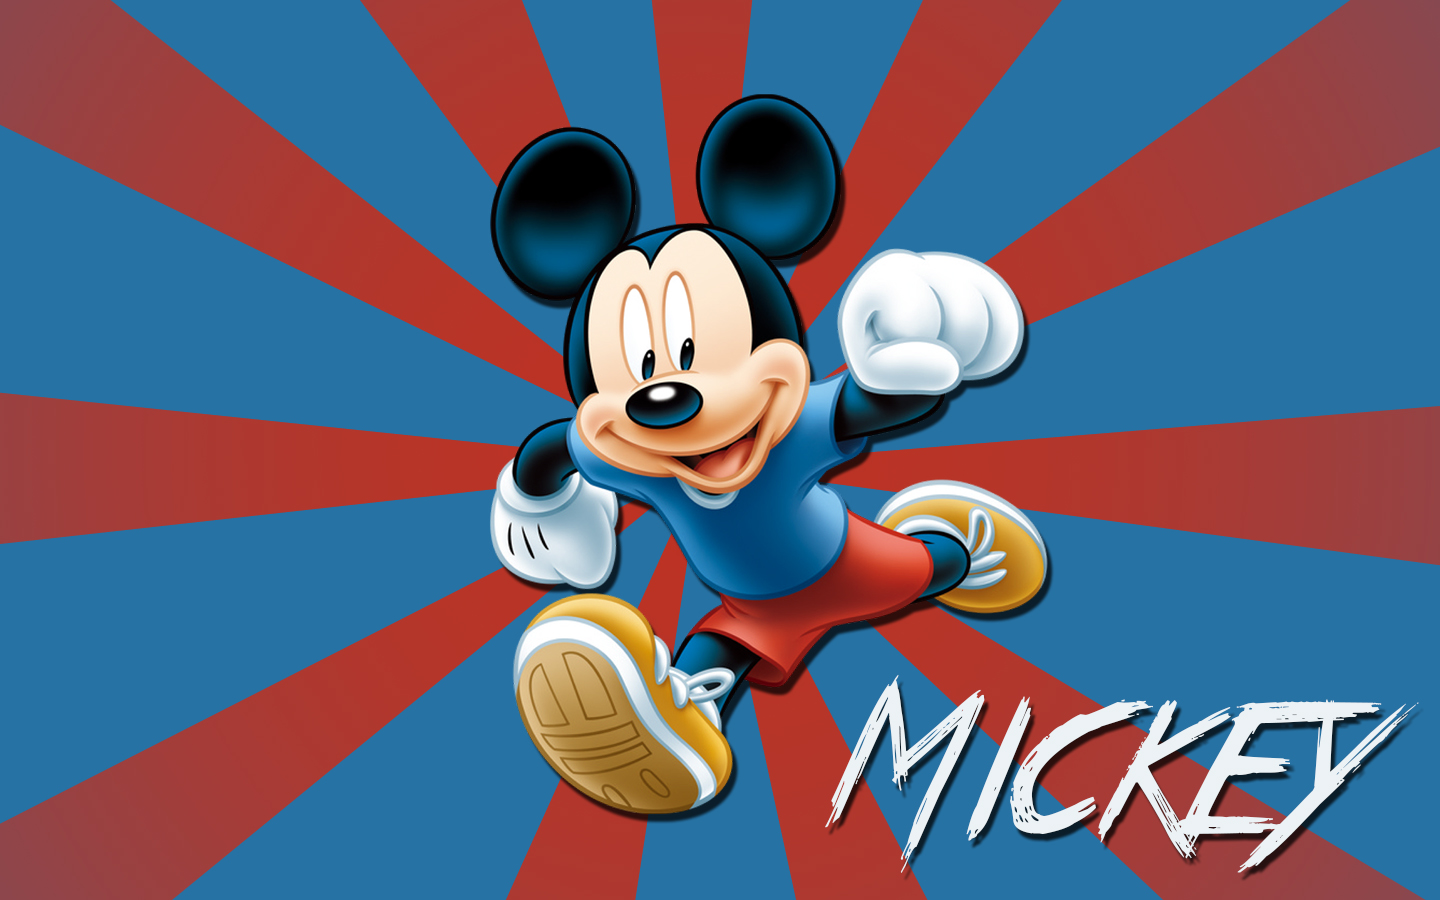 Download wallpaper mickey mouse